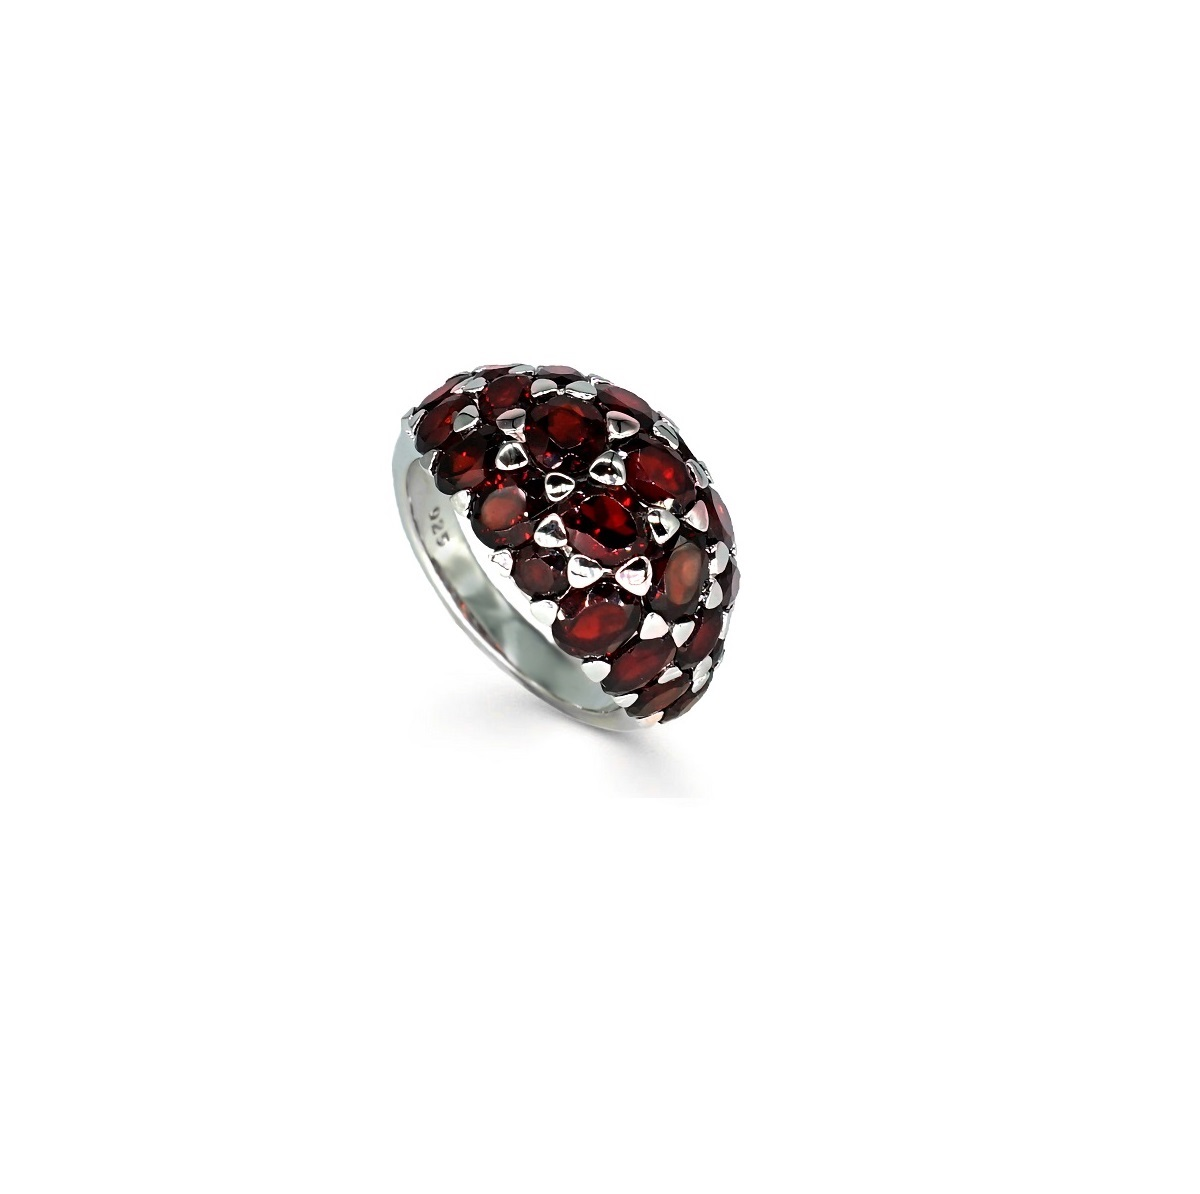 Myth of a Constellation Ring - Rhodium Plated Sterling Silver with Natural Garnet